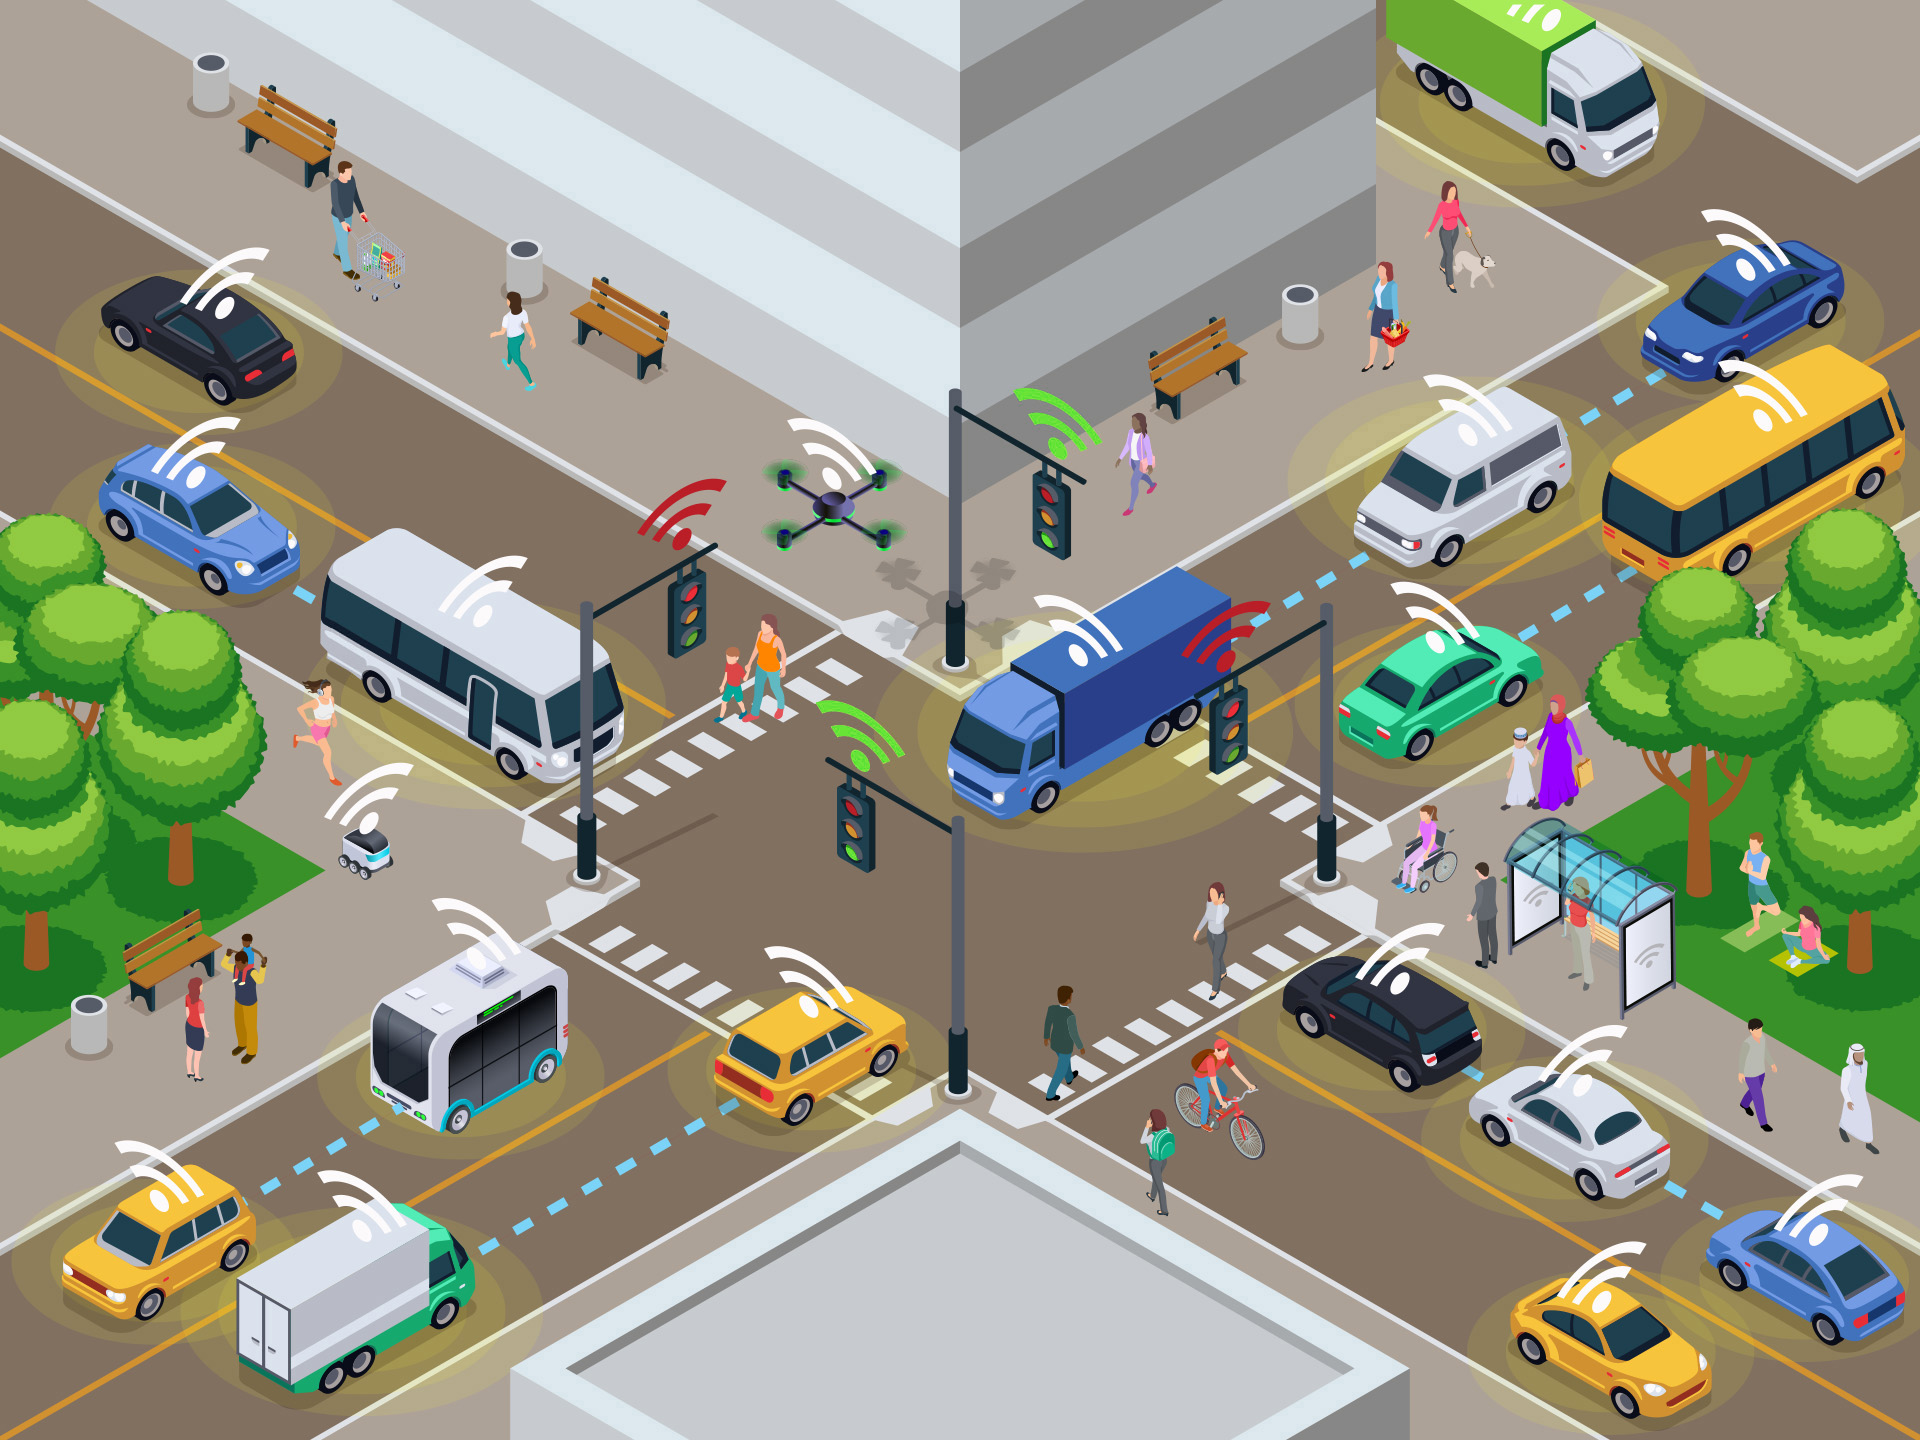 An illustrated isometric city intersection showing interactions between pedestrians and various types of vehicles